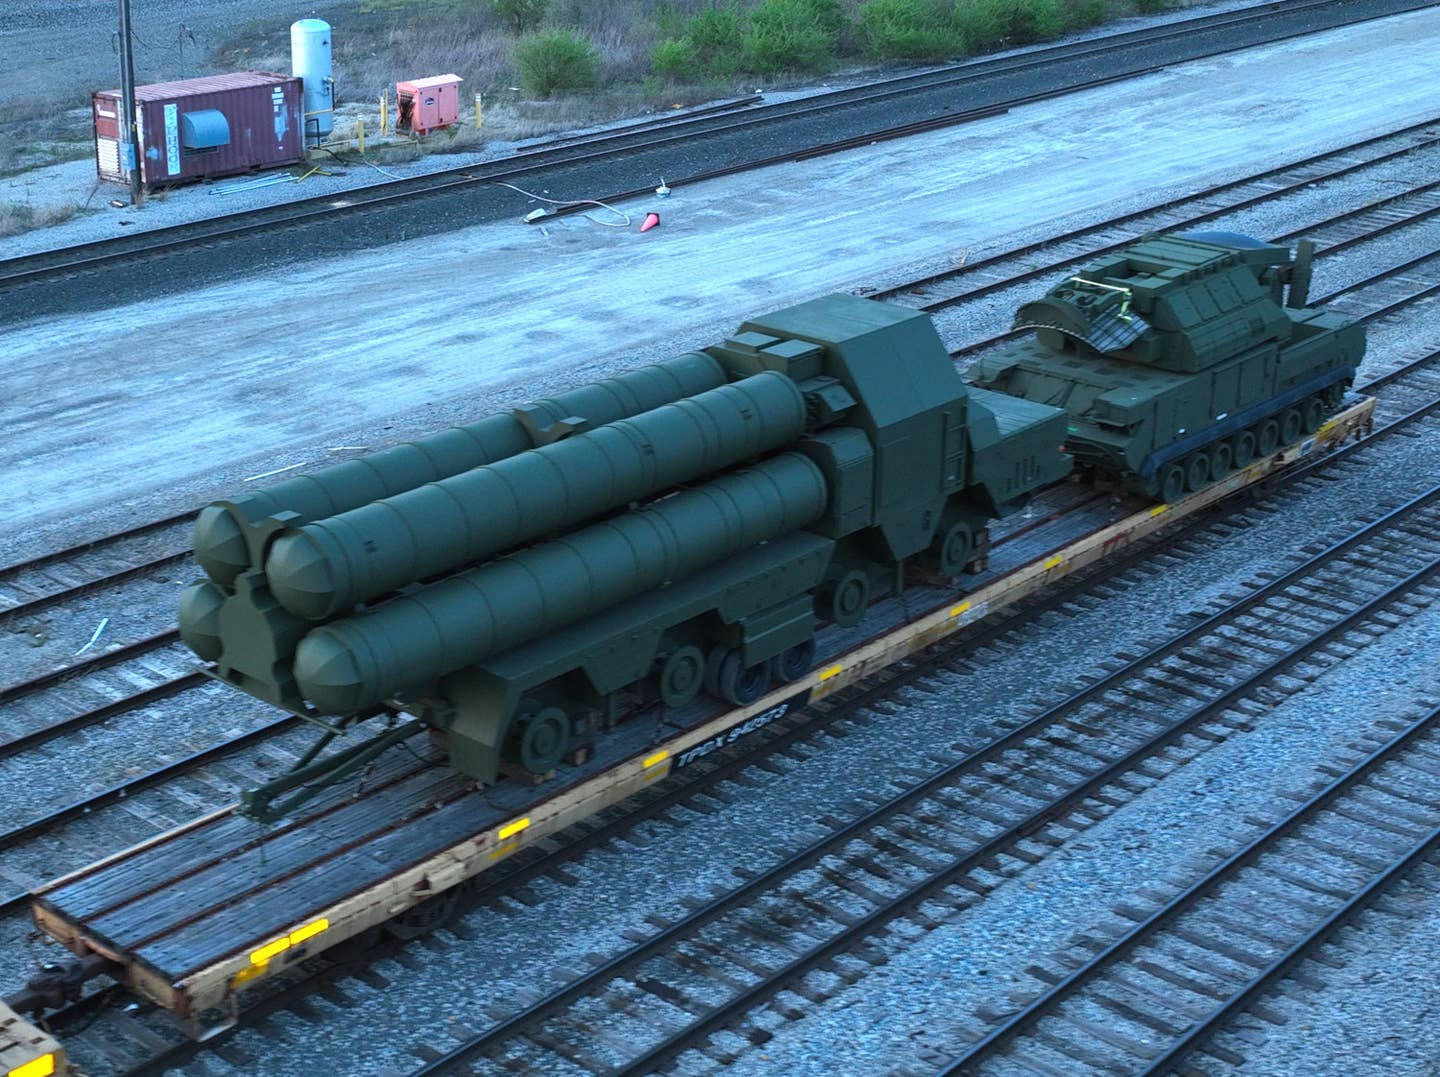 A view of the rail car with what appears to be a <a href="https://truck-encyclopedia.com/coldwar/ussr/5P85.php#:~:text=The%205P85%20is%20the%20global,by%20the%20late%20the%201970s." target="_blank" rel="noreferrer noopener">5P85S transporter-erector-launcher</a> (TEL), at left, and a Tor-M1, at right. <em>Joseph Zadeh&nbsp;/ @aboveaverage.joe</em>